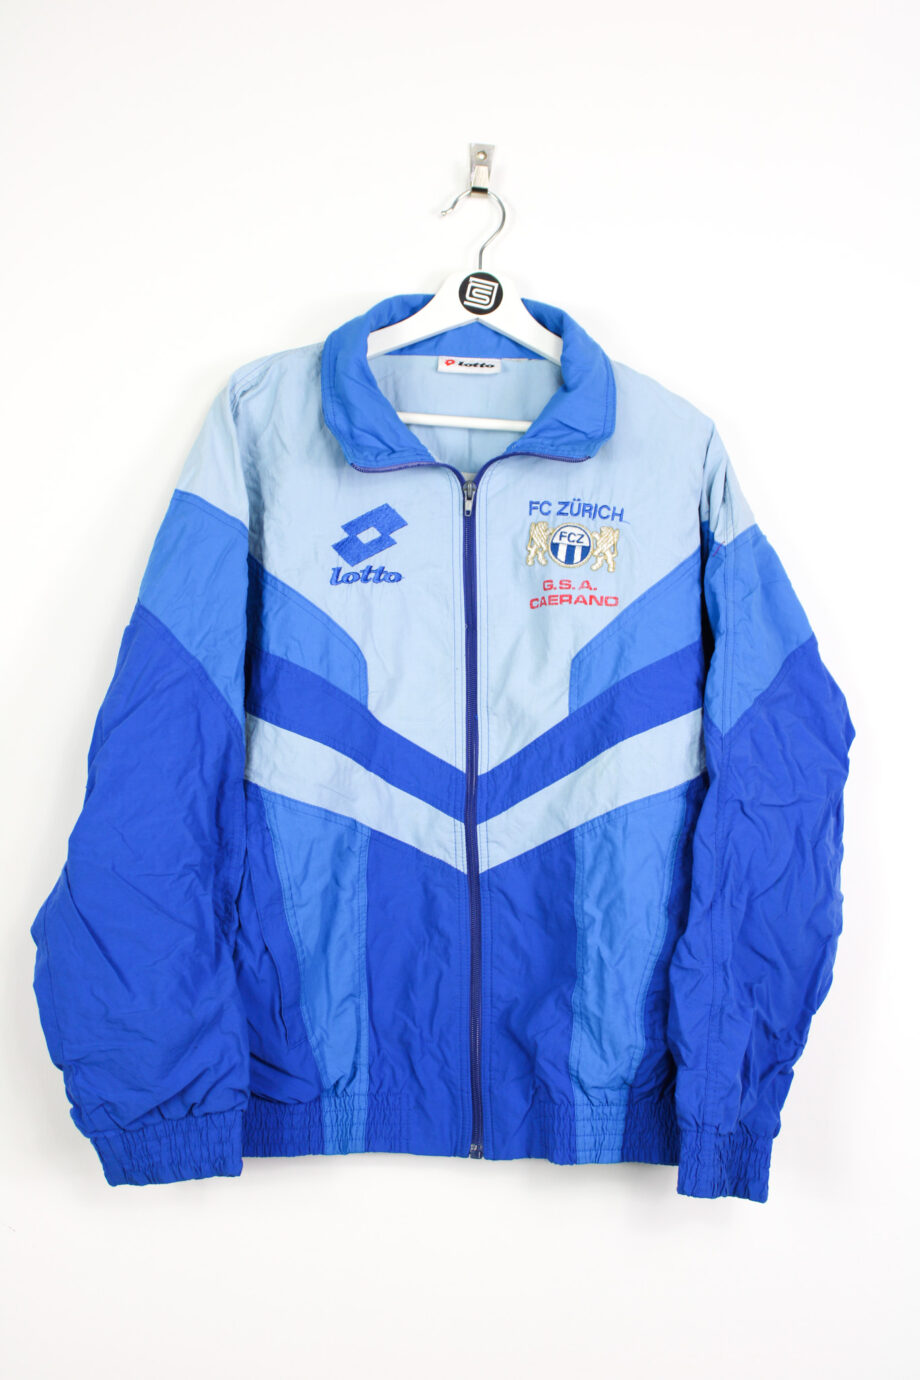 1993-95 FC Zürich *PLAYER ISSUE* track jacket - L • RB - Classic Soccer ...